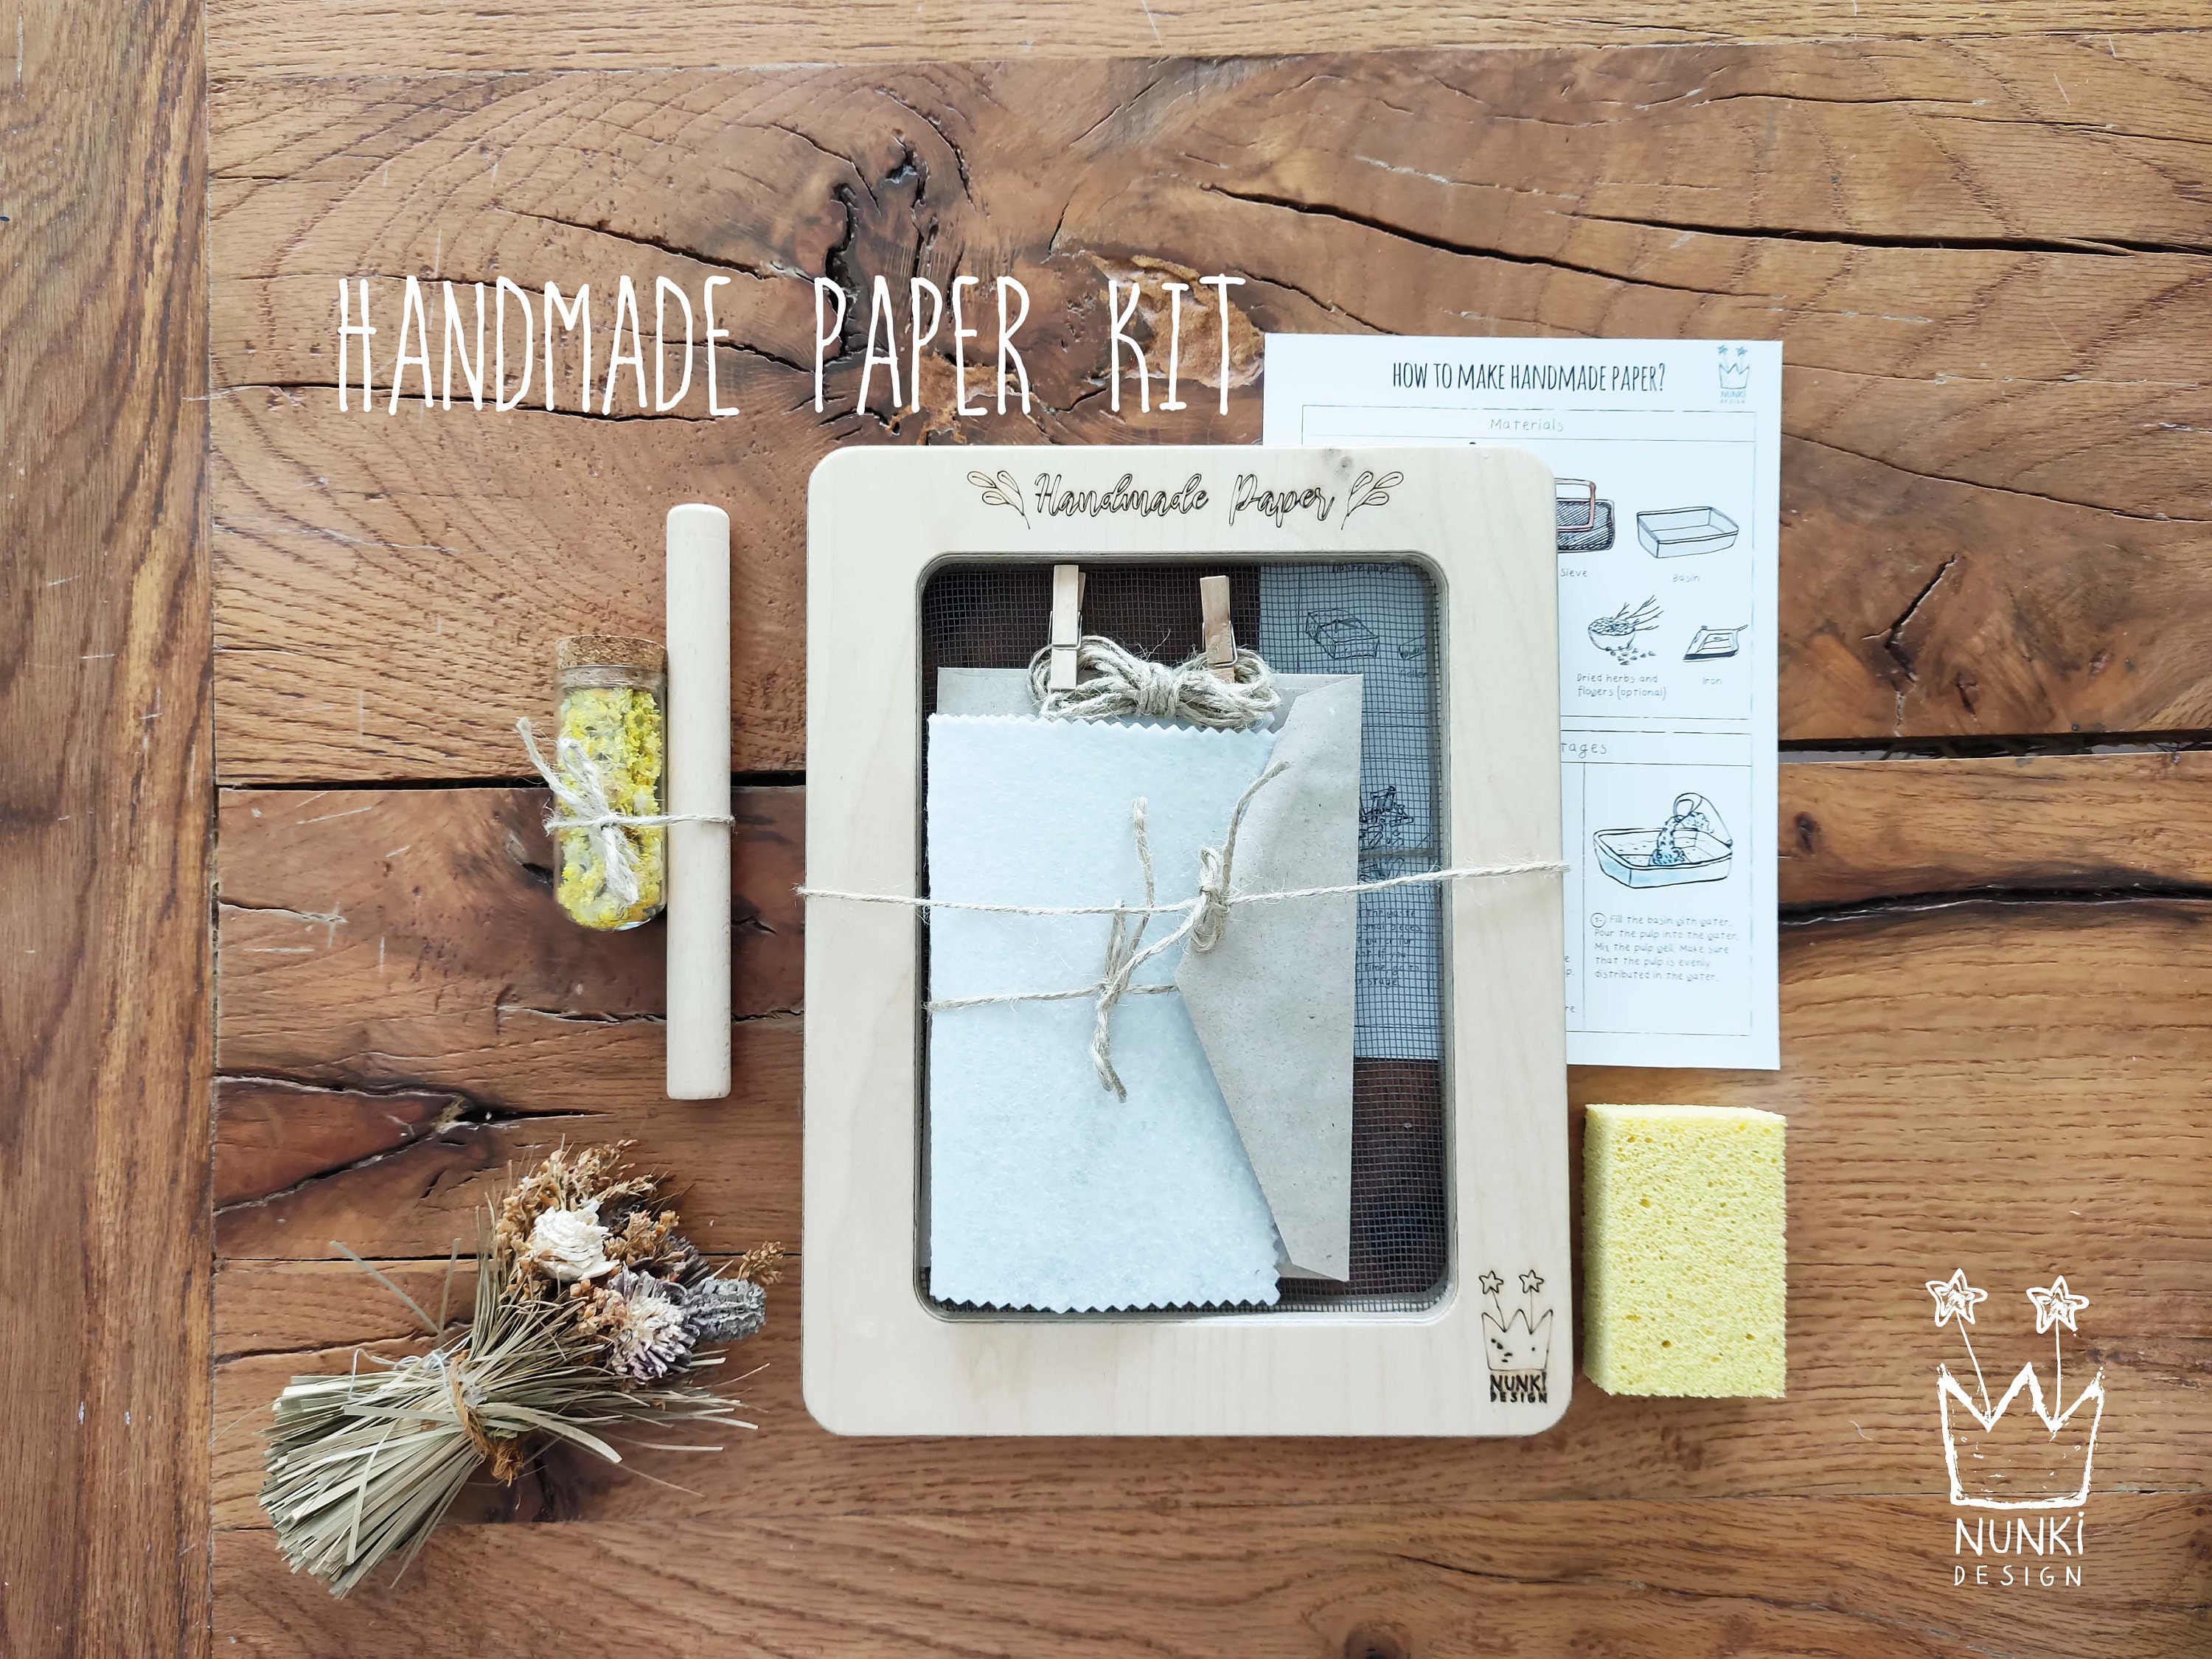 A paper making kit for making handmade paper bookmarks by recycling paper.  — Wooden Deckle Papermaking Kits And Supplie